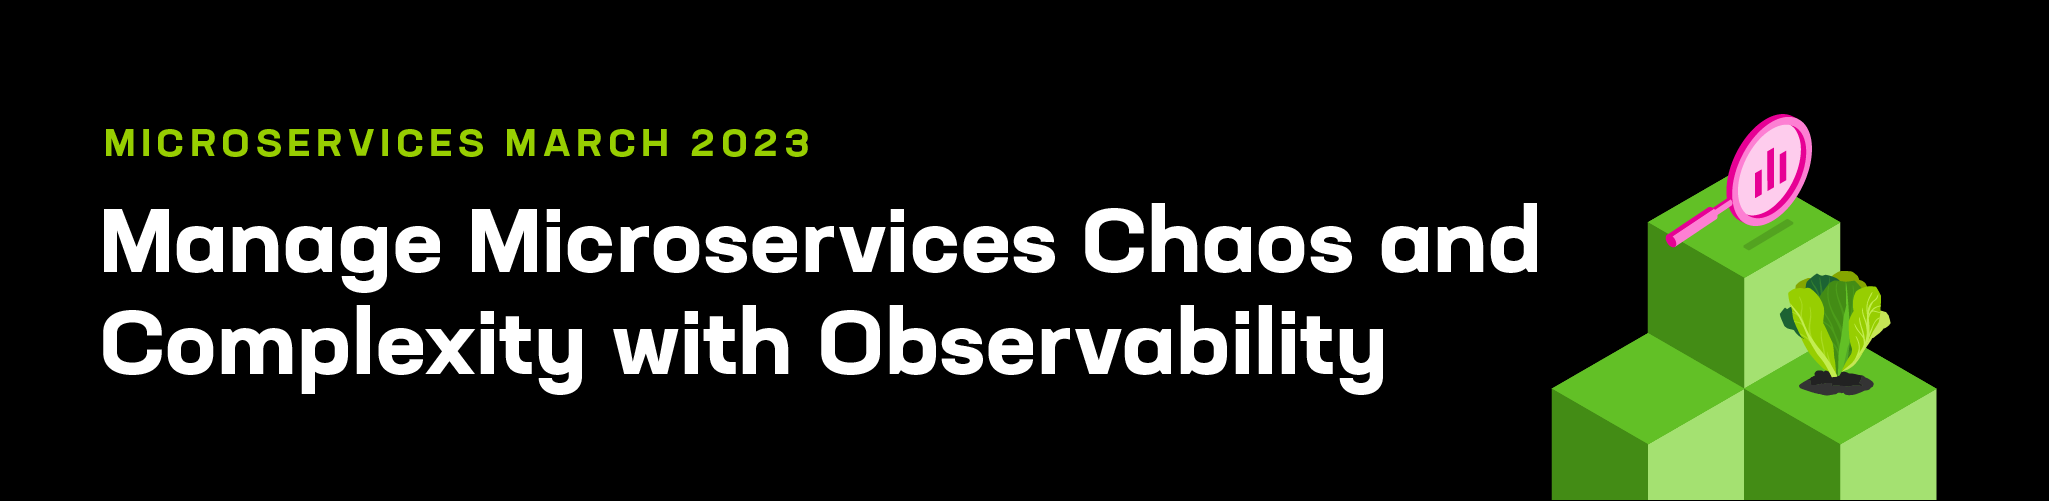 Manage Microservices Chaos and Complexity with Observability